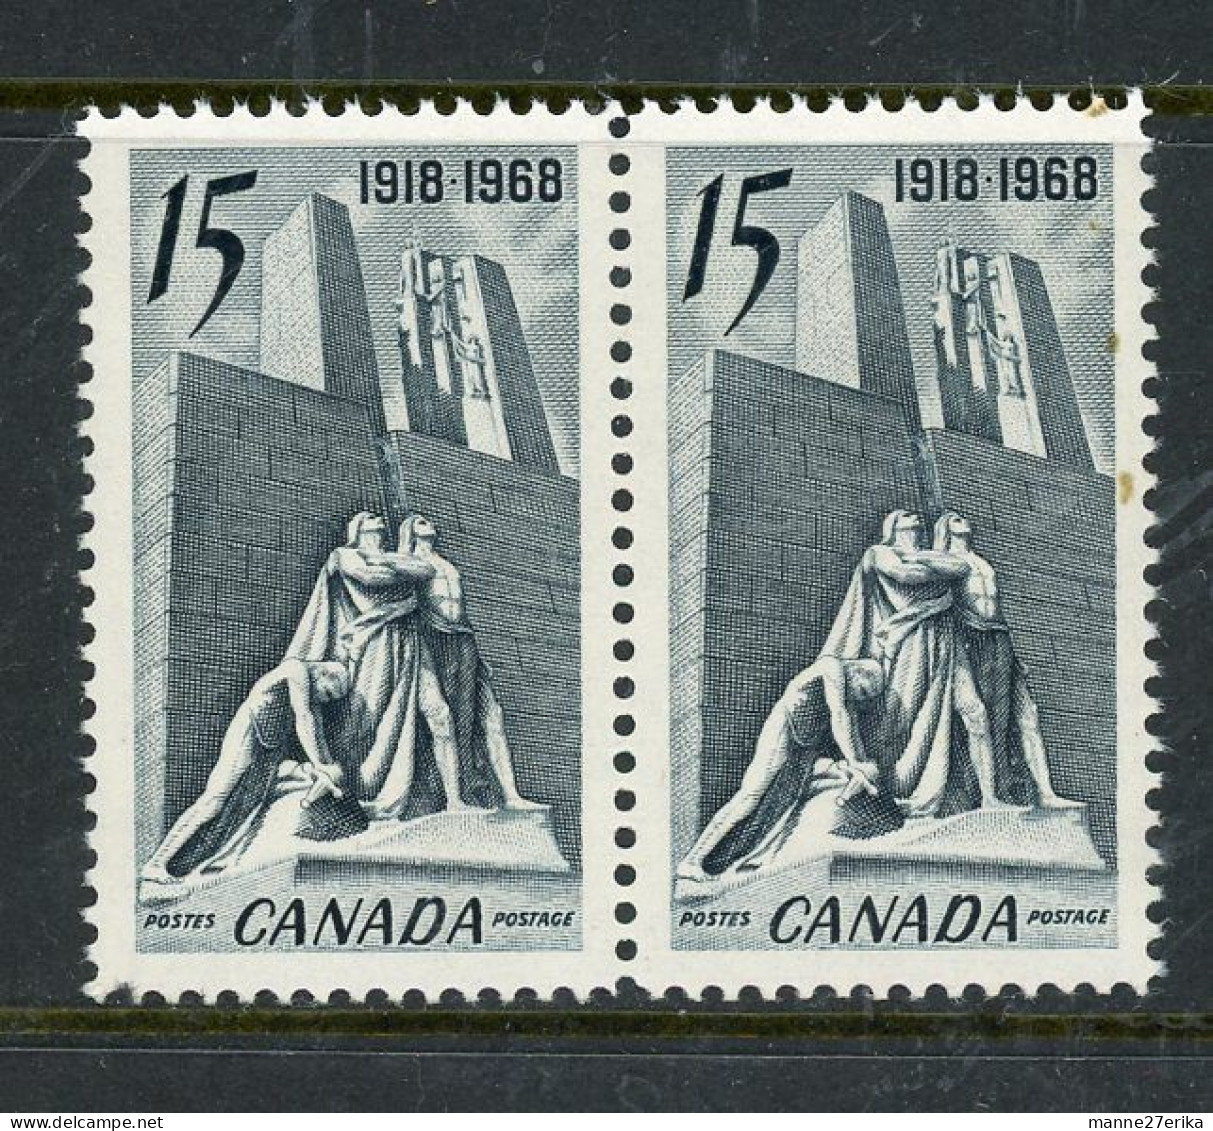 Canada 1968 MNH Canadian Vimy Memorial, Near Arras, France - Unused Stamps